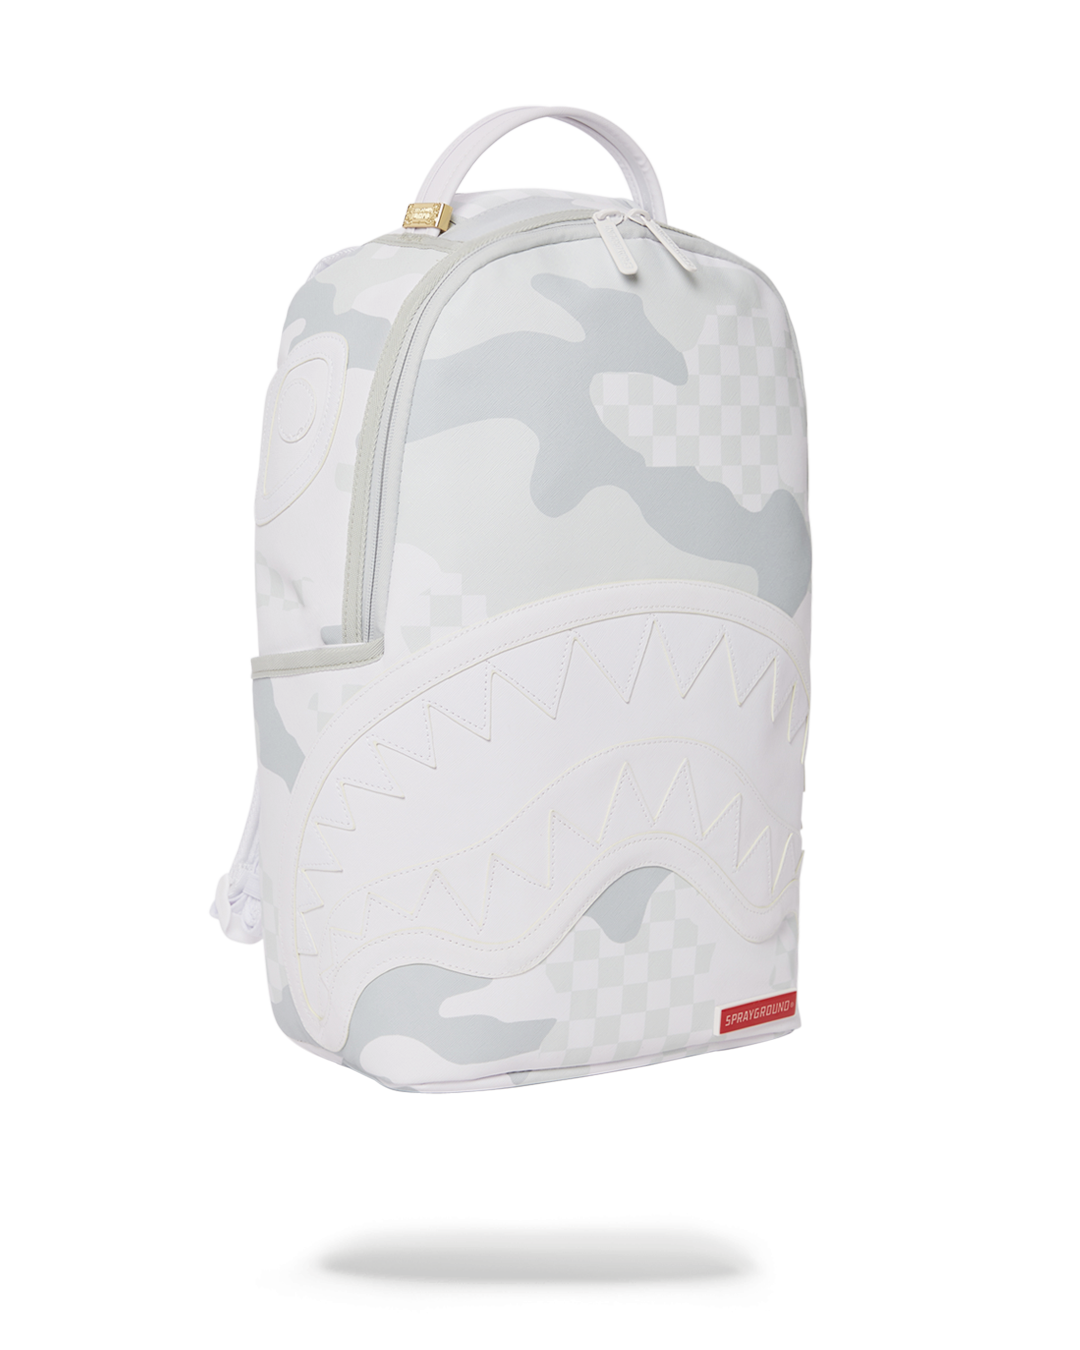 Sprayground 3am Le Blanc Tech Backpack in White for Men